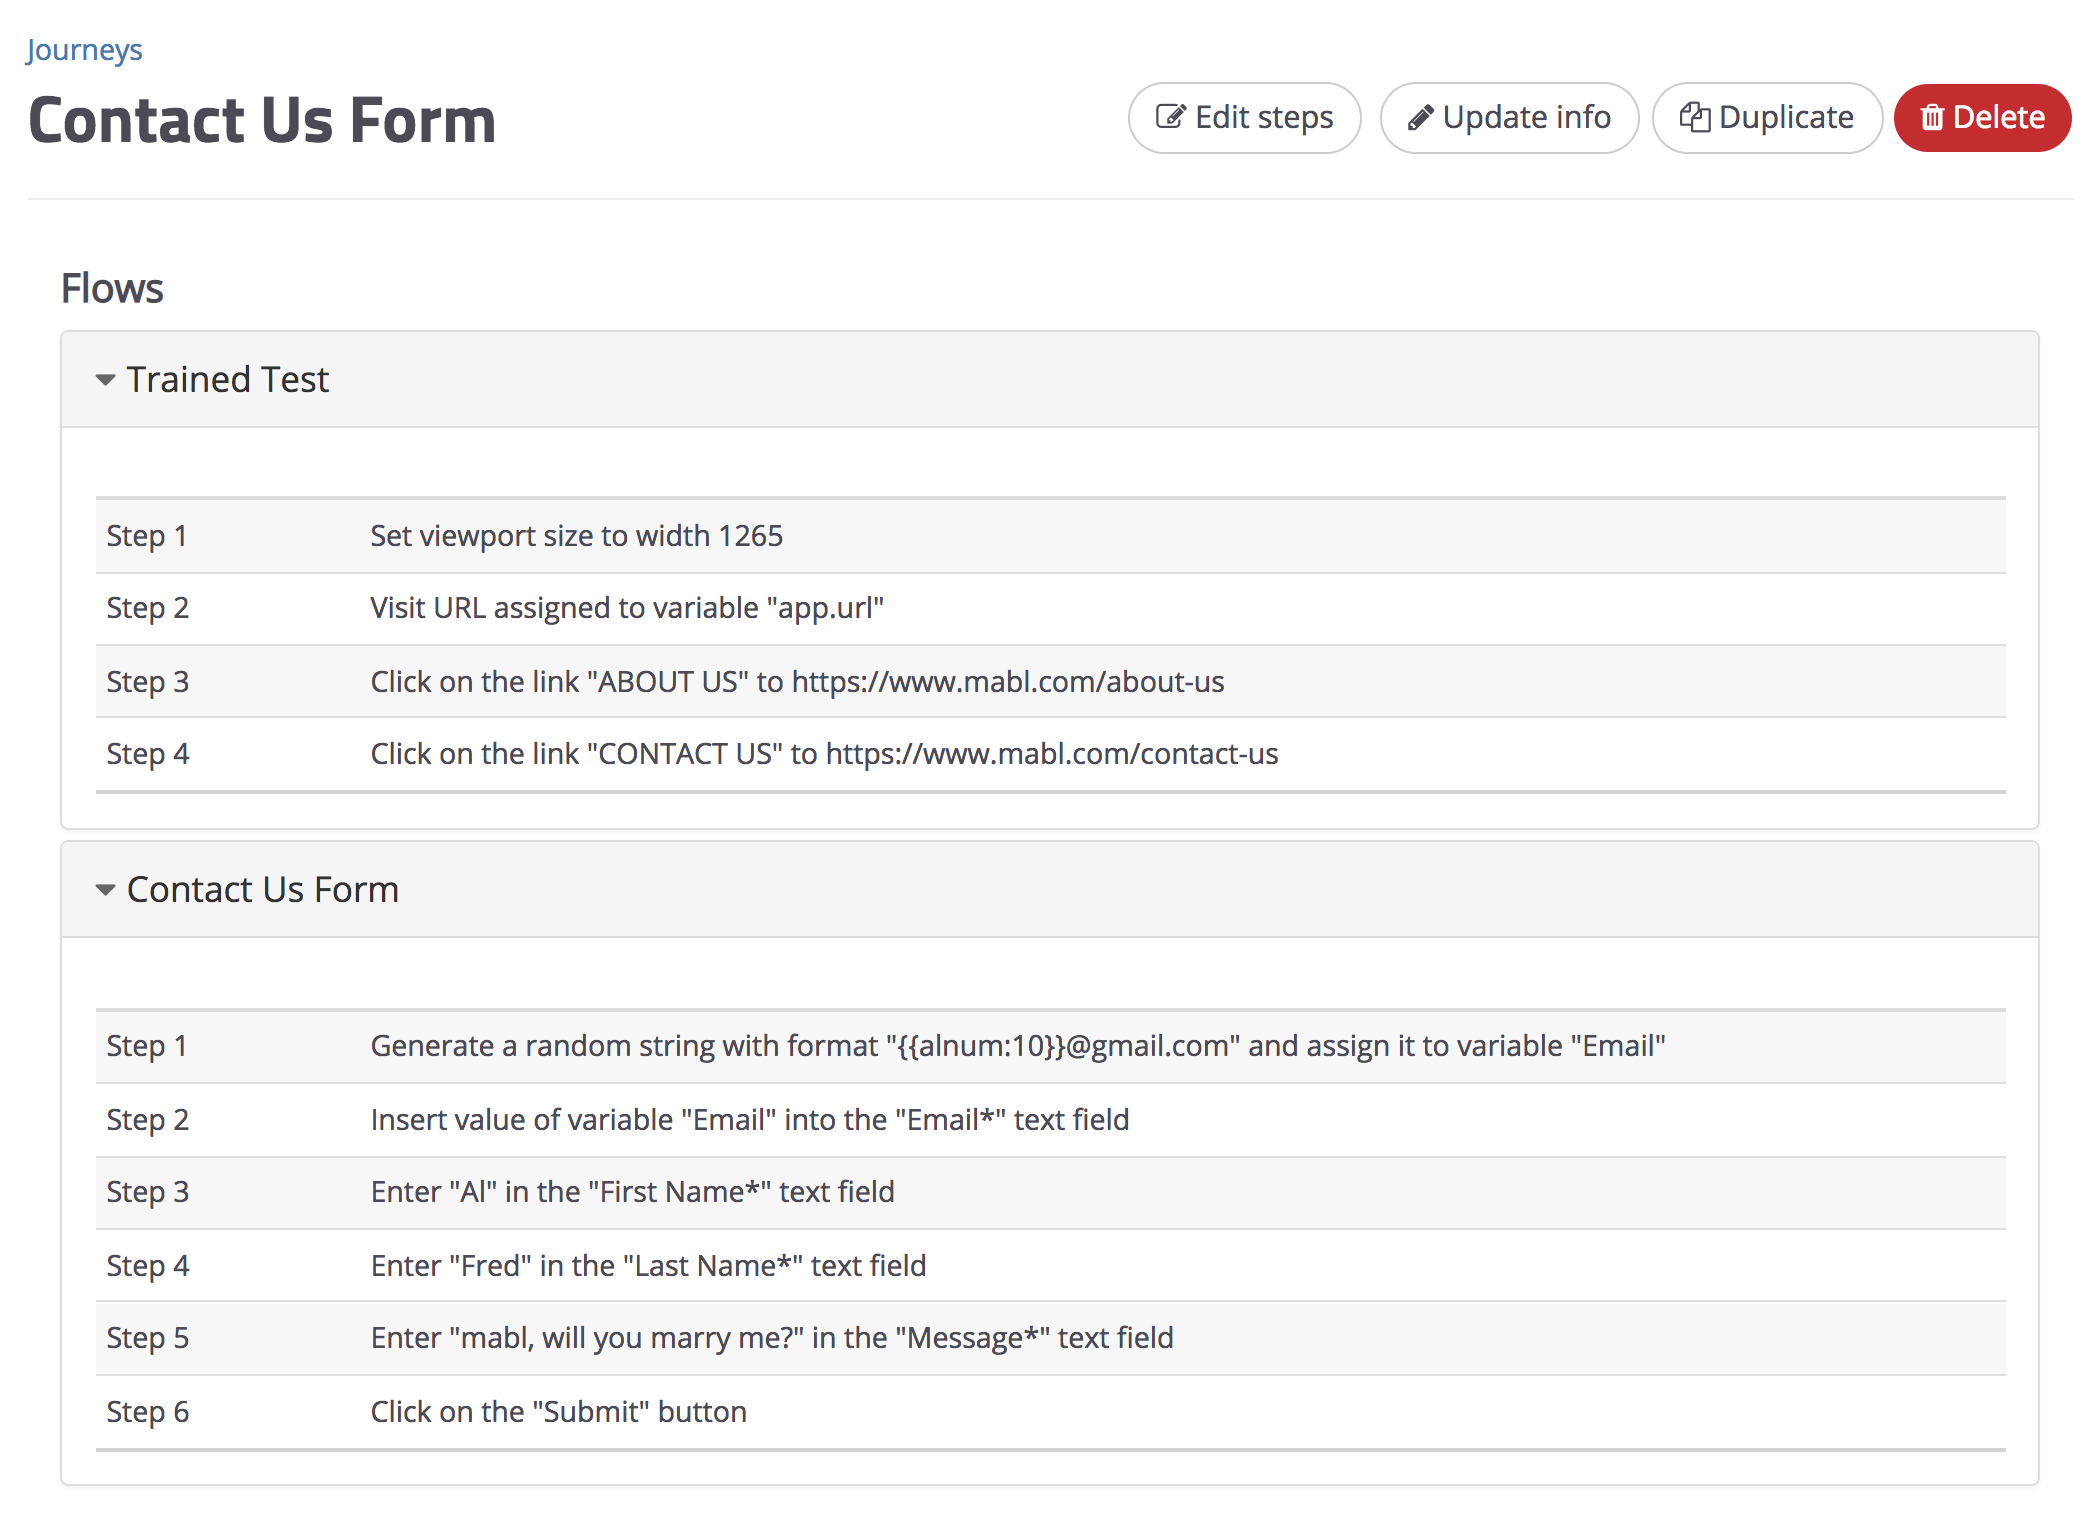 A screenshot showing an example journey which navigates to a mabl Contact Us form and fills it out.